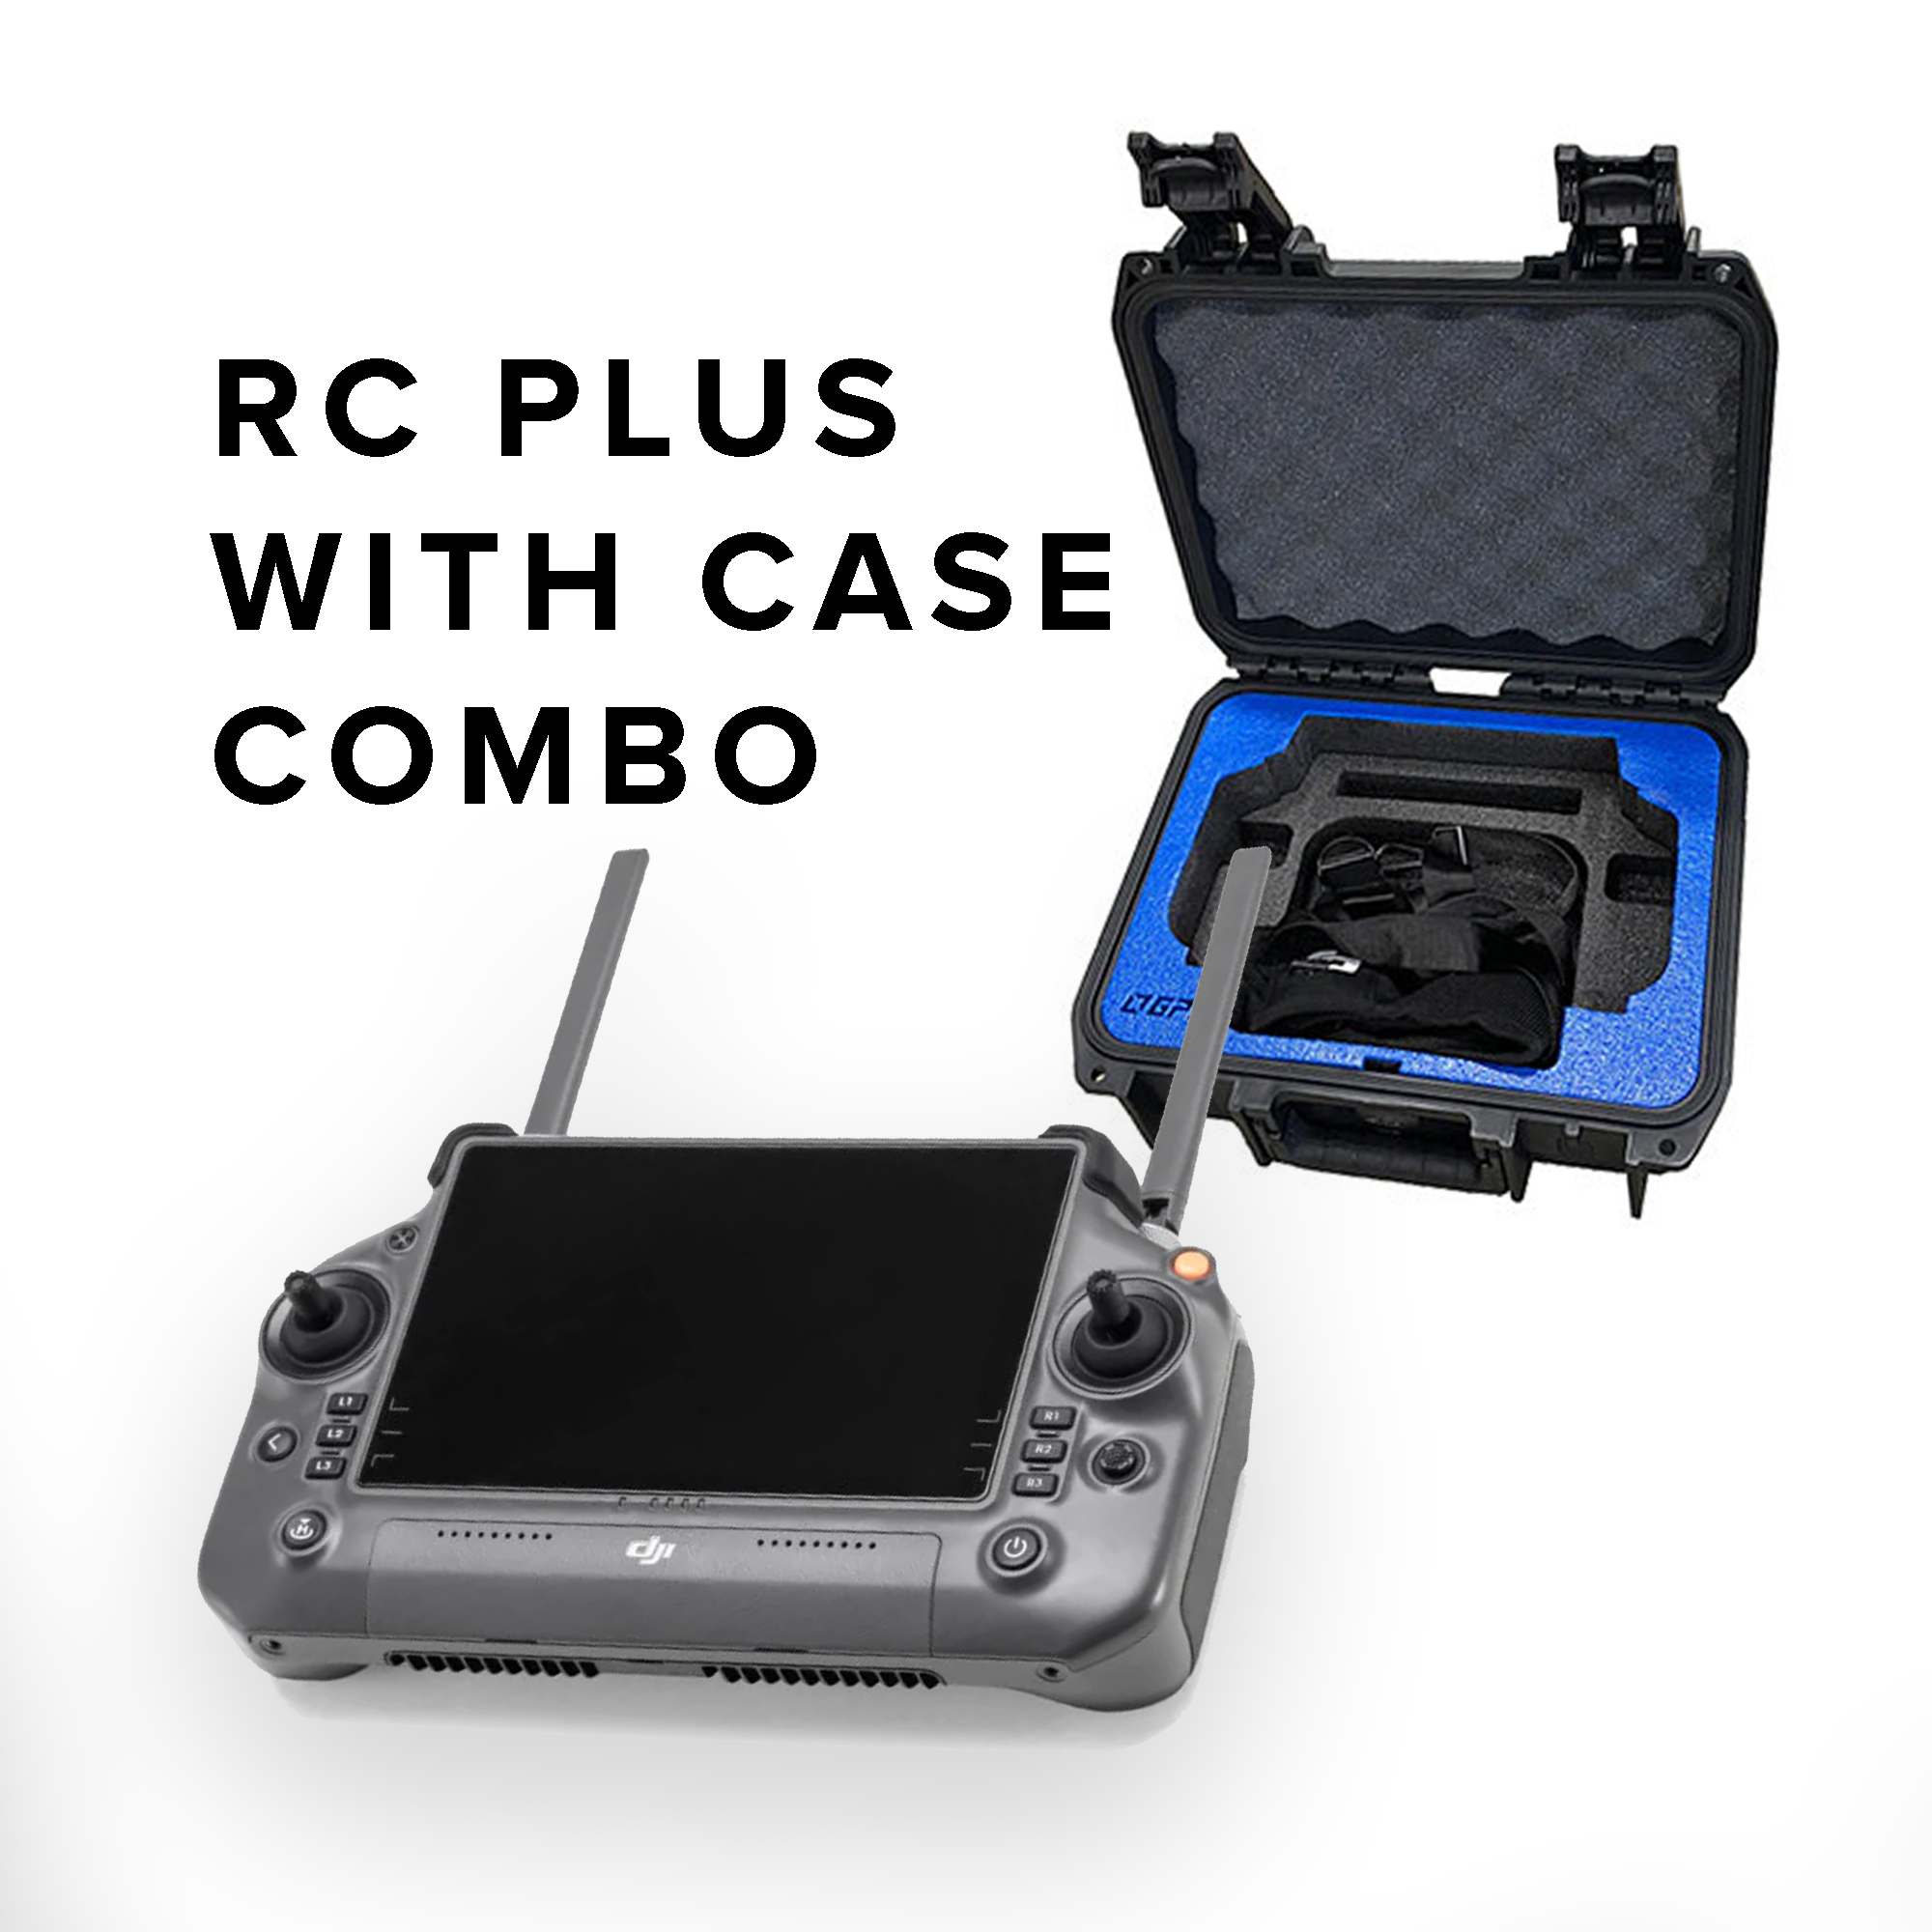 DJI RC Plus with GPC Case Combo